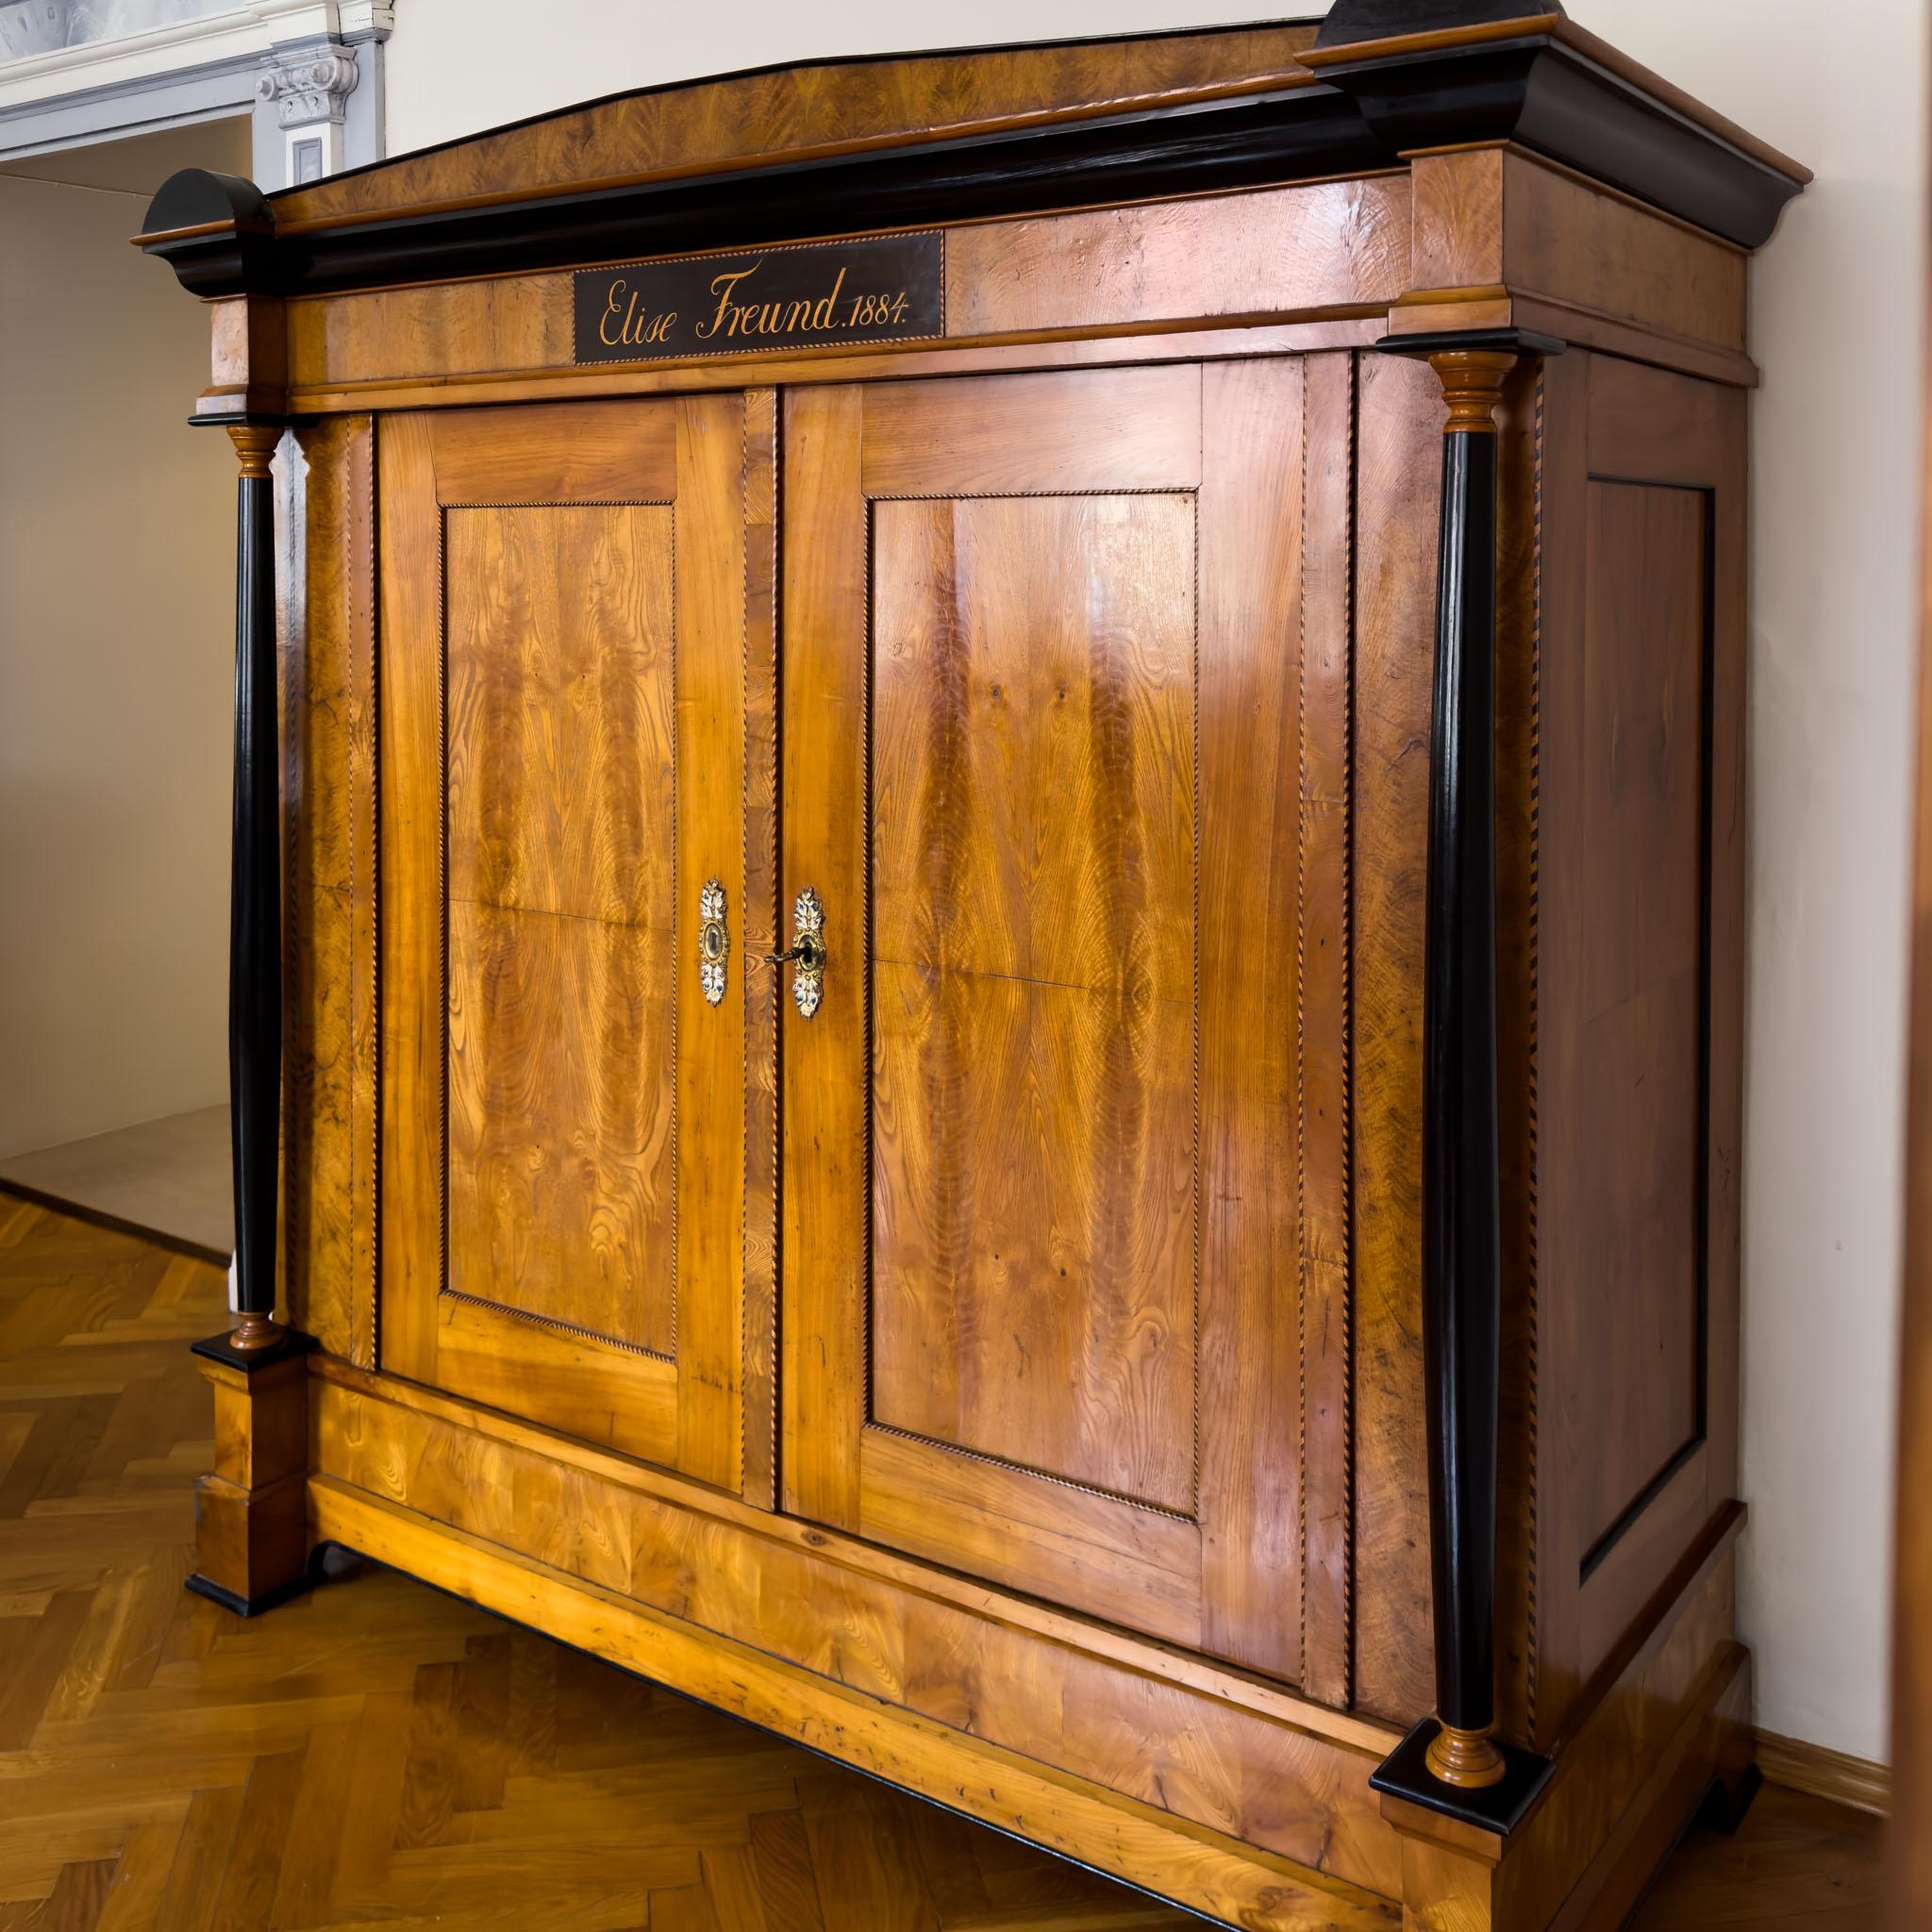 Large Biedermeier-Style Wardrobe in Ash and Cherry, Dated 1884 For Sale 4